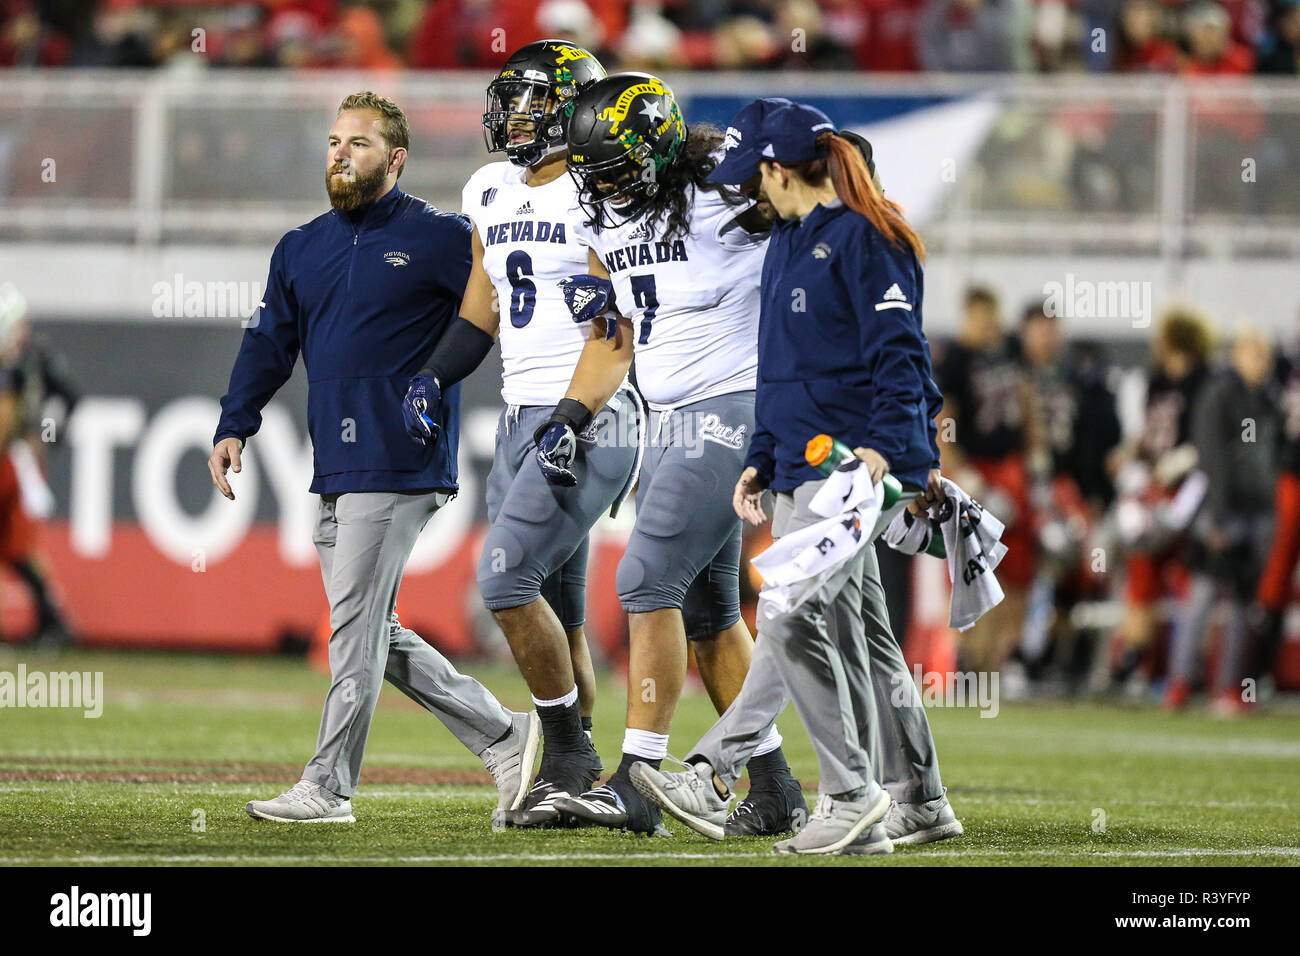 Las Vegas, NV, USA. 24th Nov, 2018. Nevada Wolf Pack linebacker Gabriel Sewell (7) is assisted off the field by his brother Nevada Wolf Pack defensive back Nephi Sewell (6) during the NCAA football game featuring the Nevada Wolf Pack and the UNLV Rebels at Sam Boyd Stadium in Las Vegas, NV. The UNLV Rebels defeated the Nevada Wolf Pack 34 to 29. Christopher Trim/CSM/Alamy Live News Stock Photo